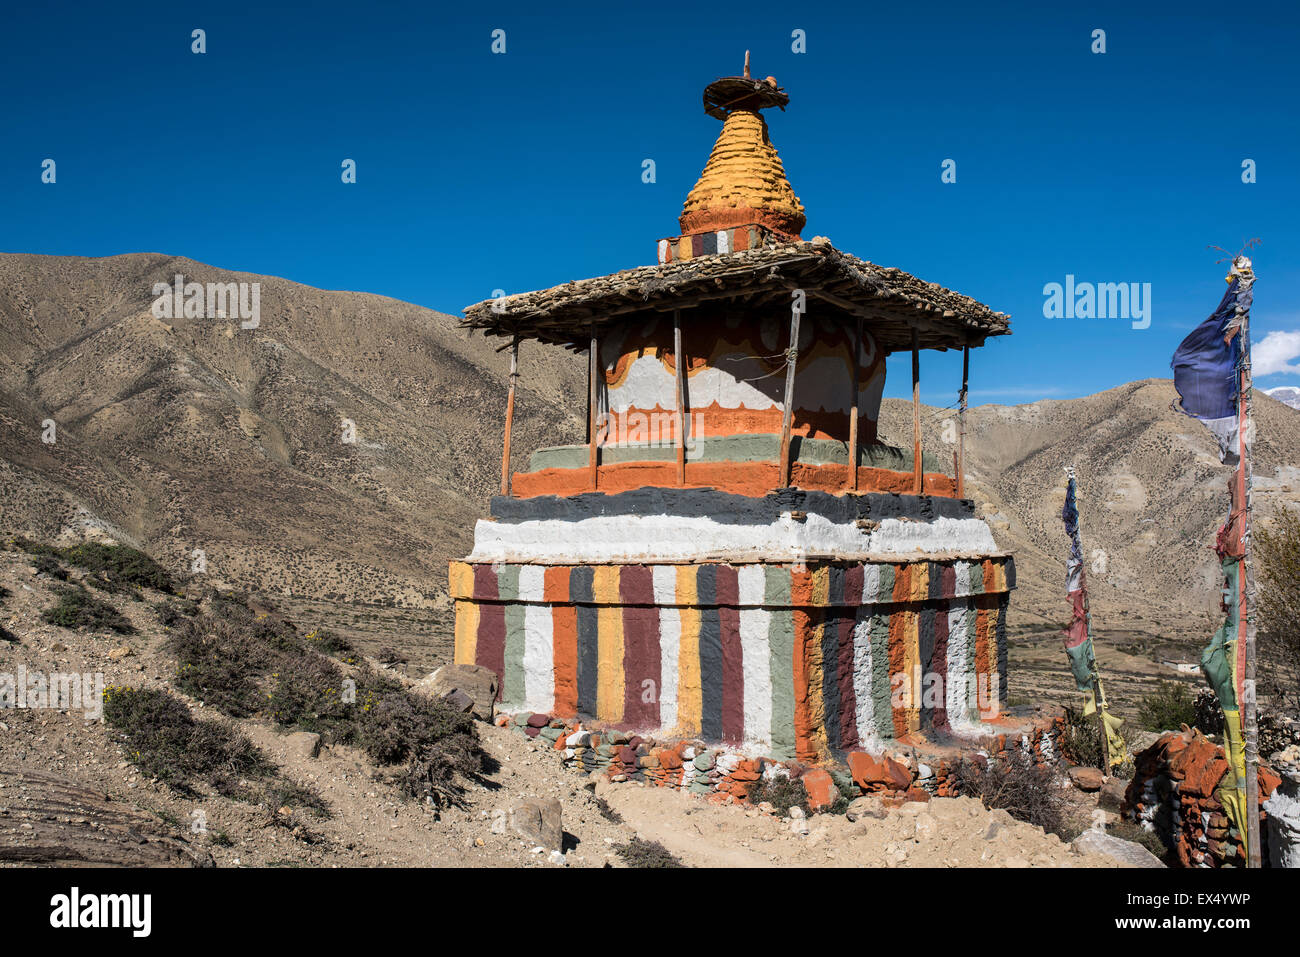 Colourfully painted Buddhist stupa in front of mountain landscape, Samar, Mustang, Nepal Stock Photo